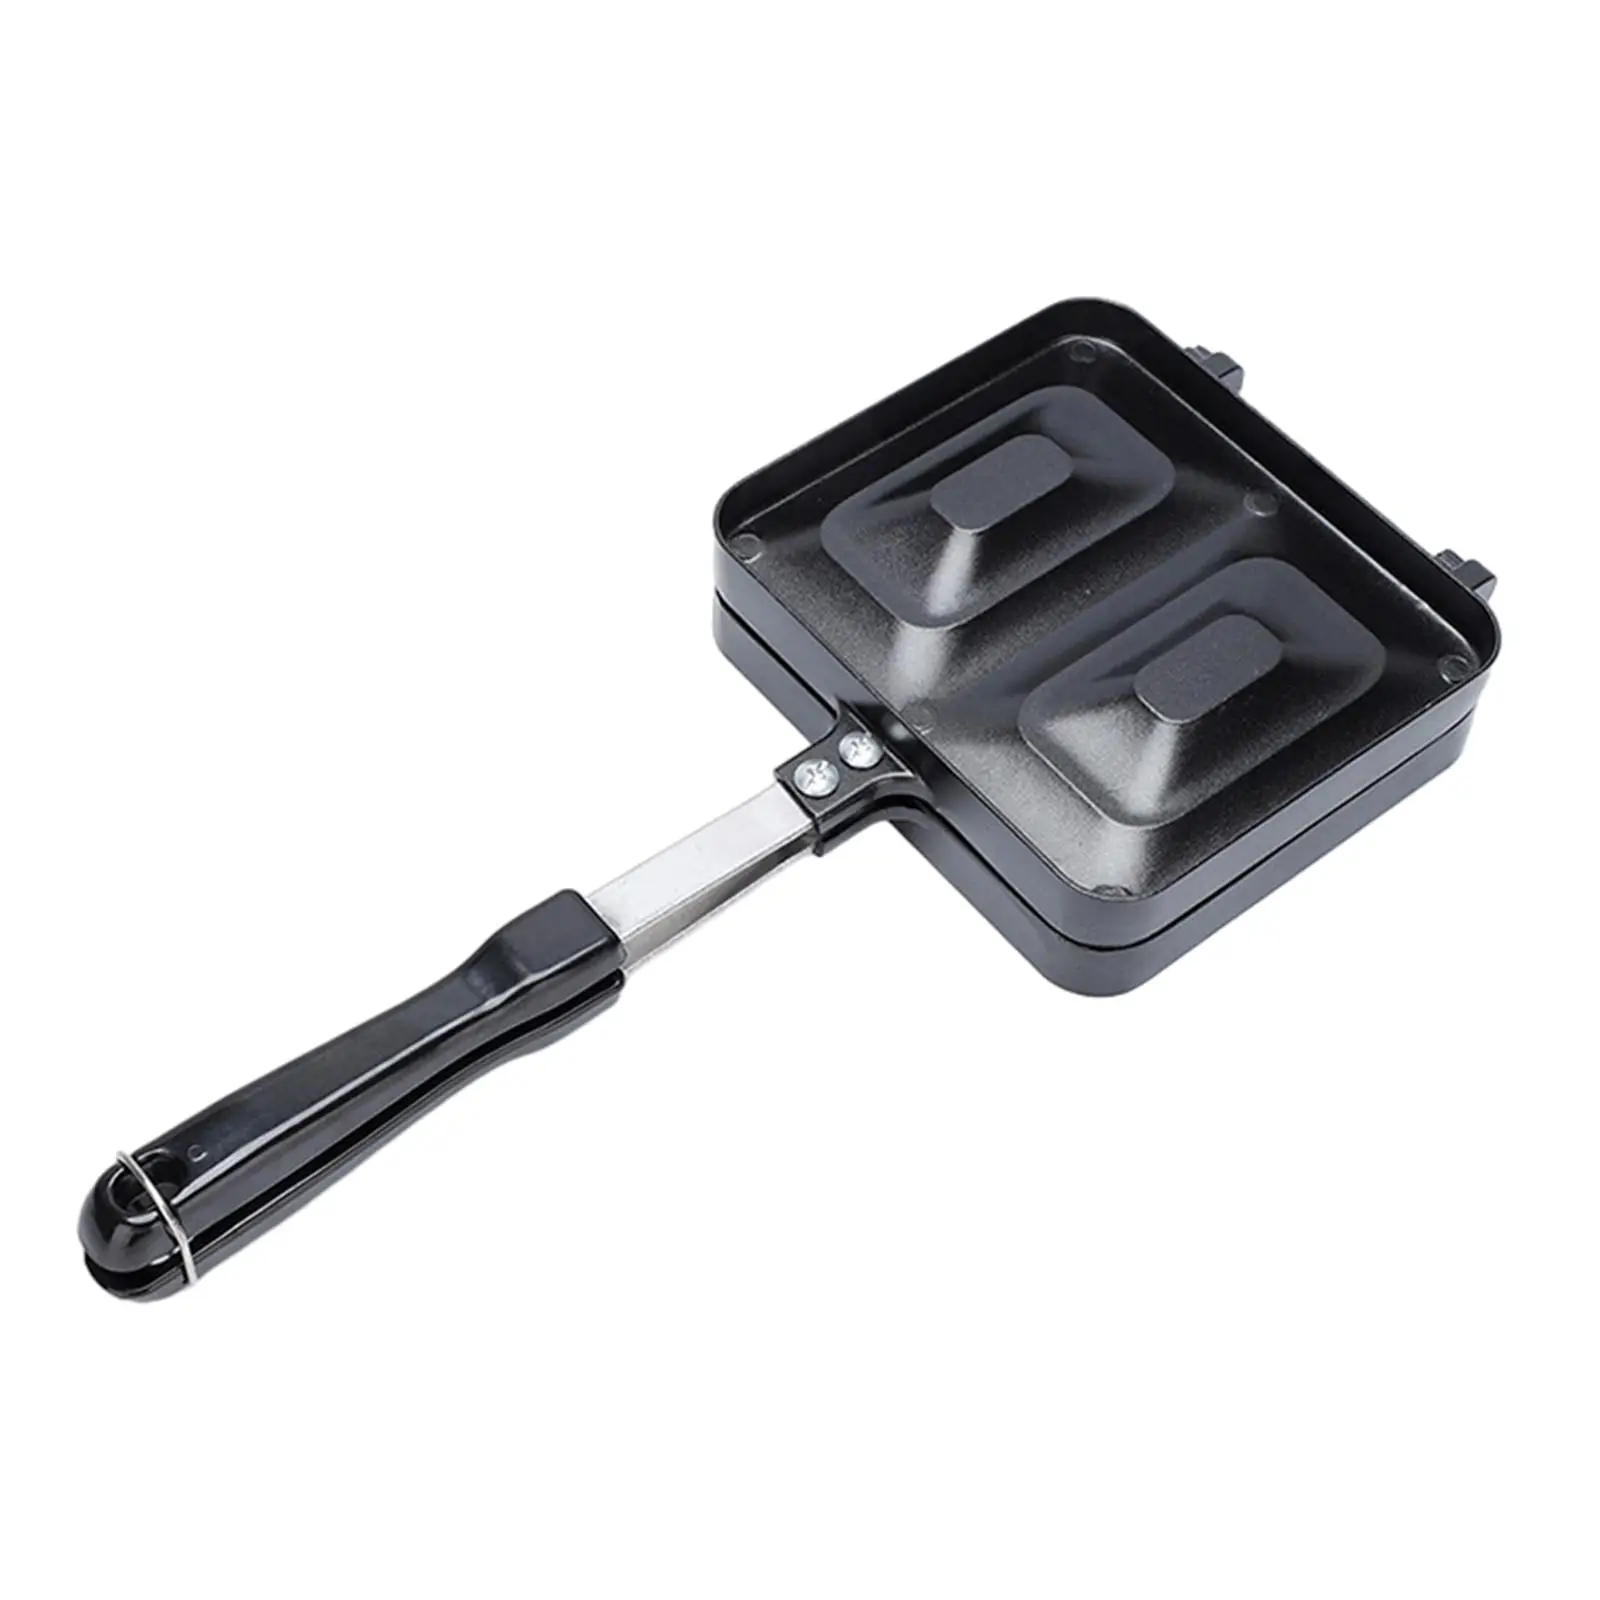 Sandwich Maker Nonstick Multifunction Sandwich Making Pan Double Sided Frying Pan for Steak Muffins Omelets Toast Outdoor